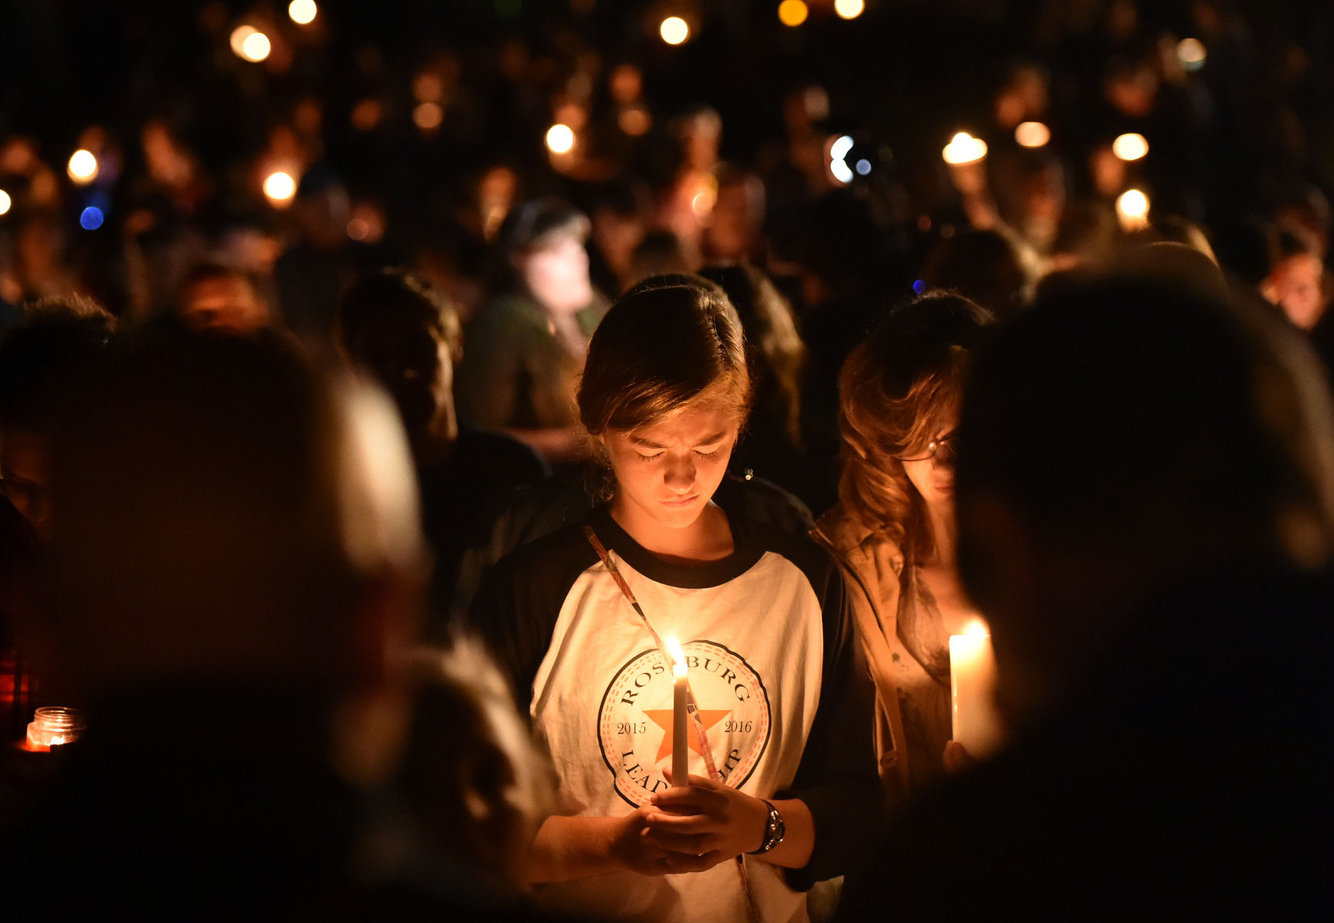 MASS SHOOTING: A girl weeps during a vigil for victims killed in Roseberg, Oregon